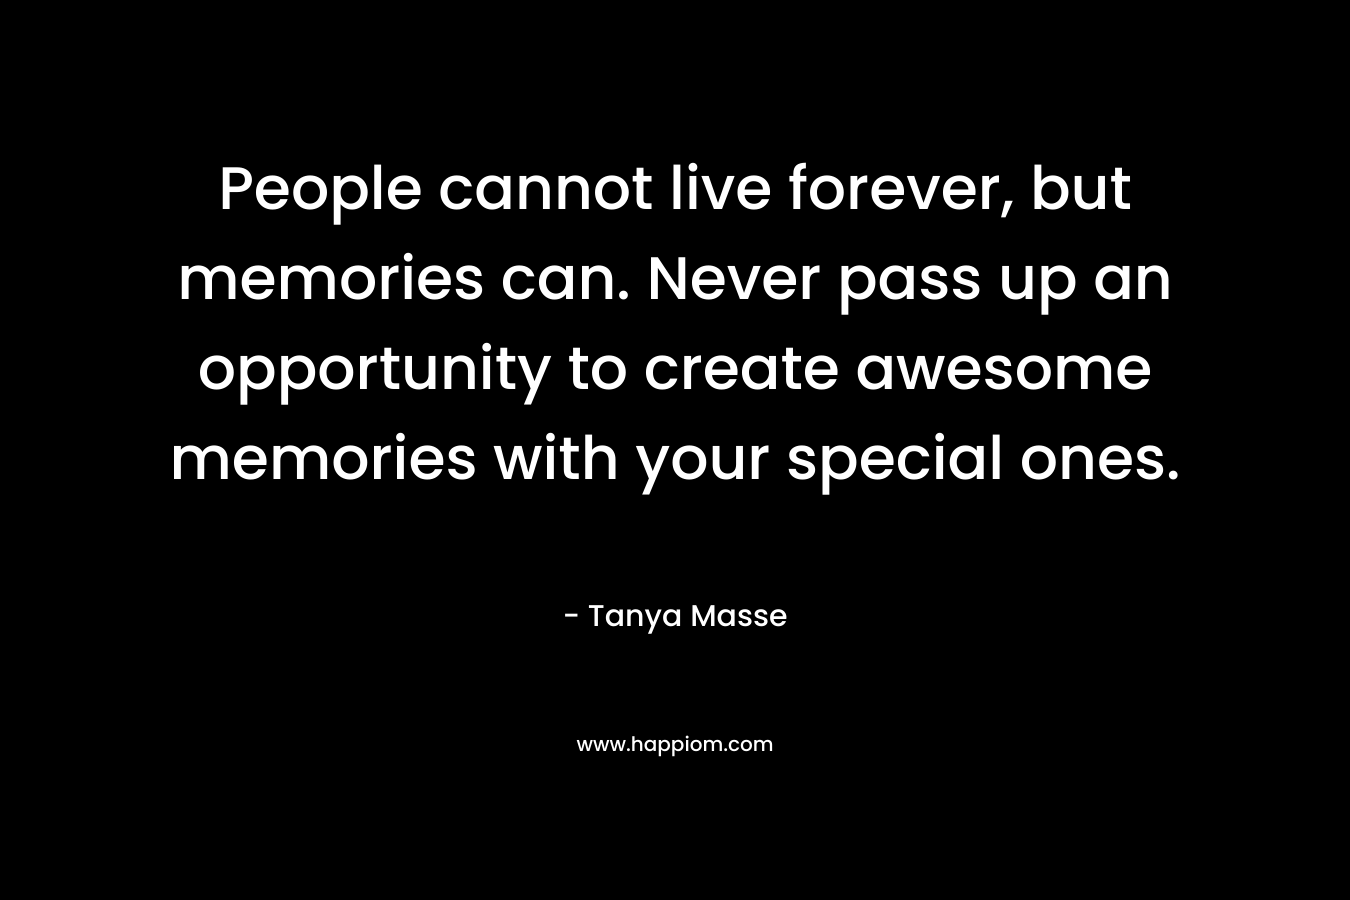 People cannot live forever, but memories can. Never pass up an opportunity to create awesome memories with your special ones. – Tanya Masse